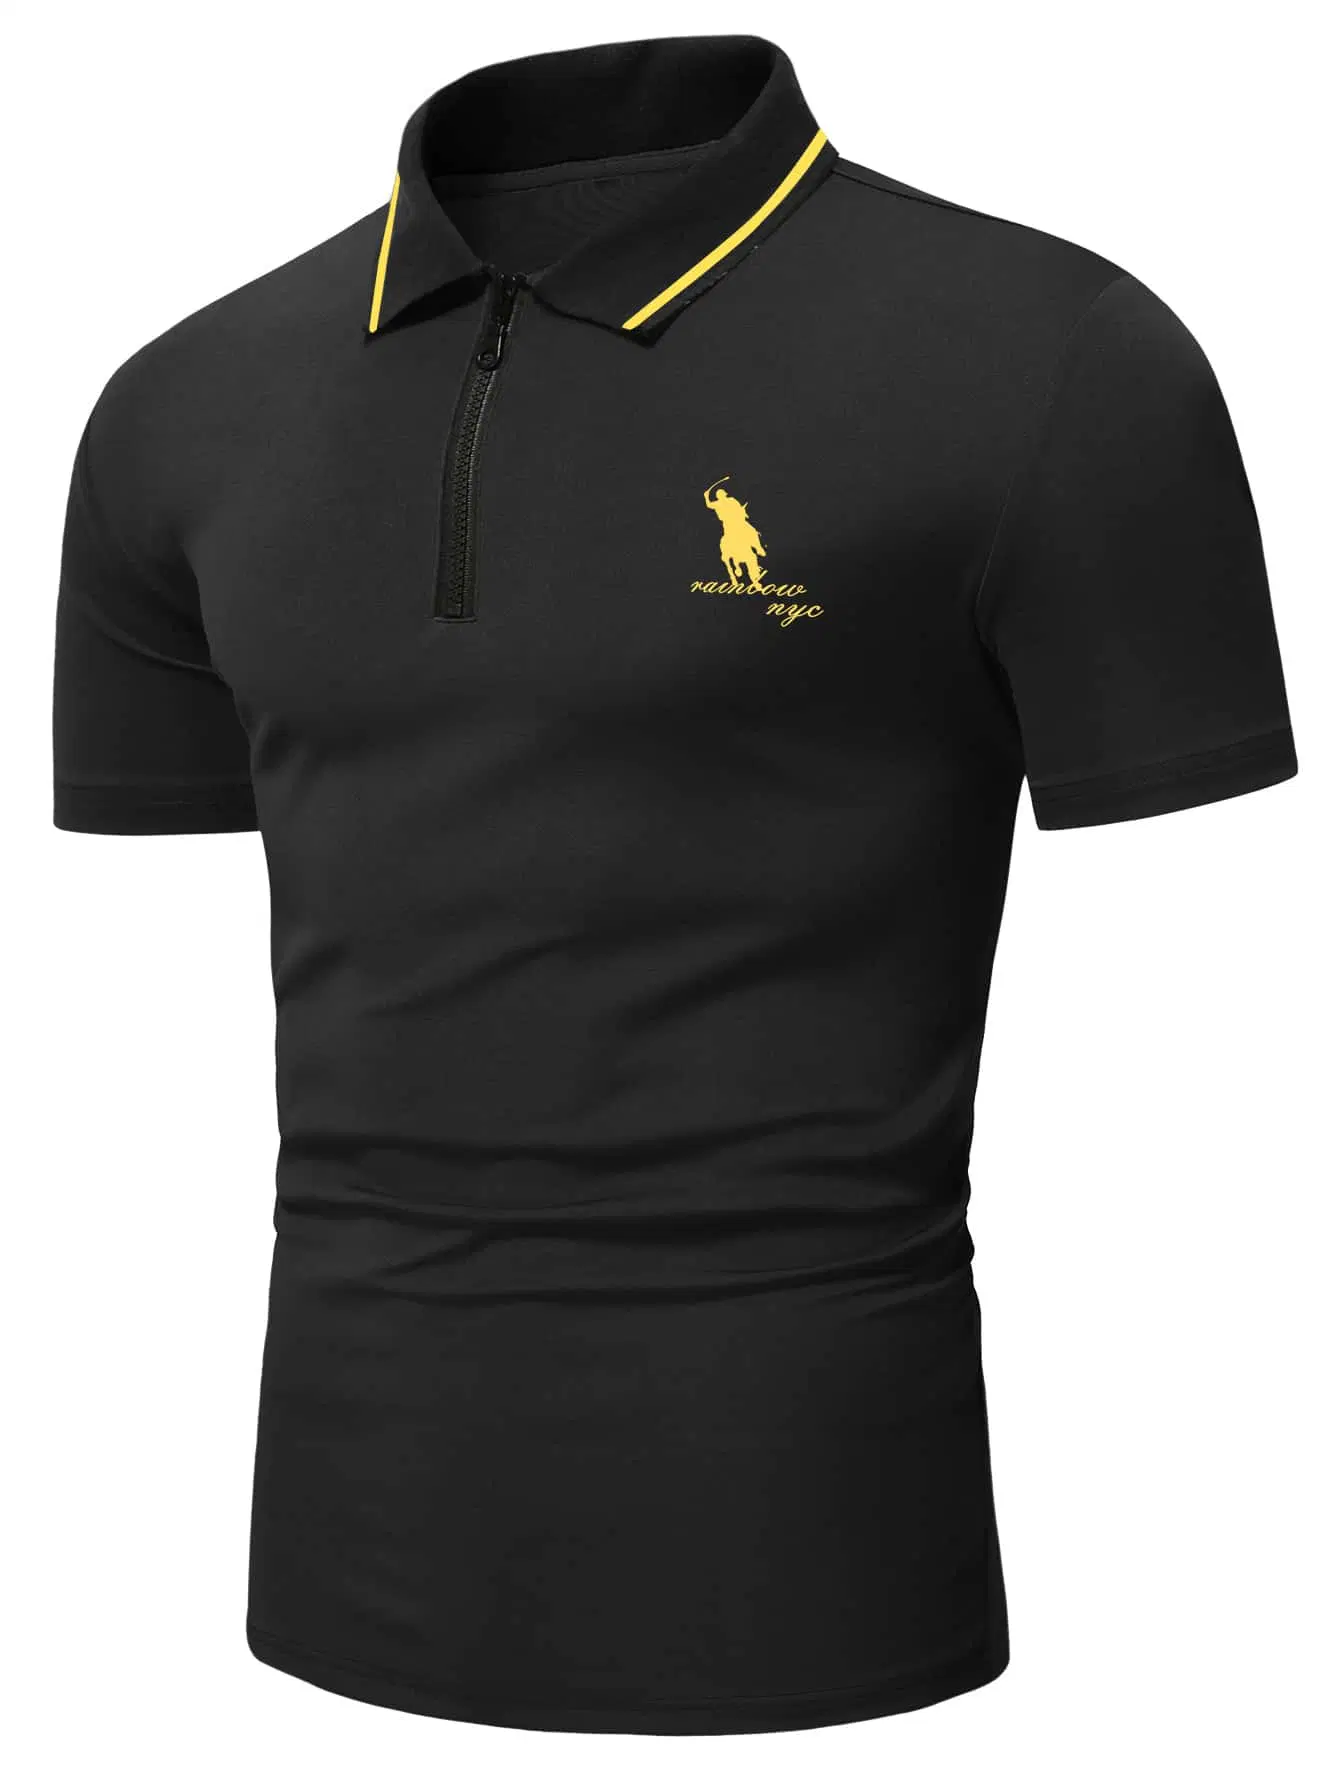 Polo Neck with Zip Tshirts 100% Cotton Embroidered Men's Shirt Custom Golf Polo Shirts Custom Logo Polos T Shirts for Men